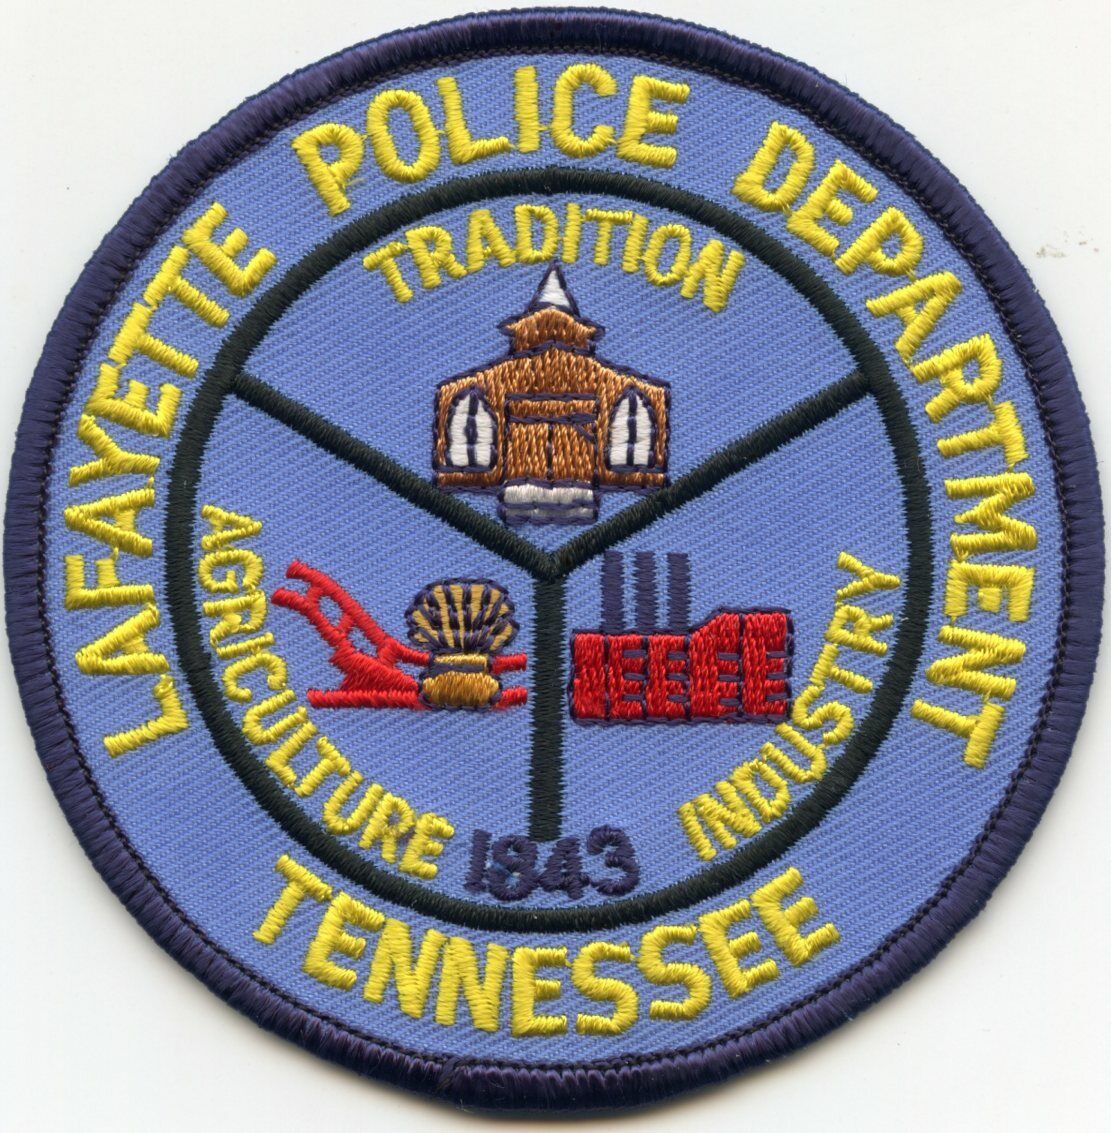 LAFAYETTE TENNESSEE TN Tradition Agriculture Industry POLICE PATCH